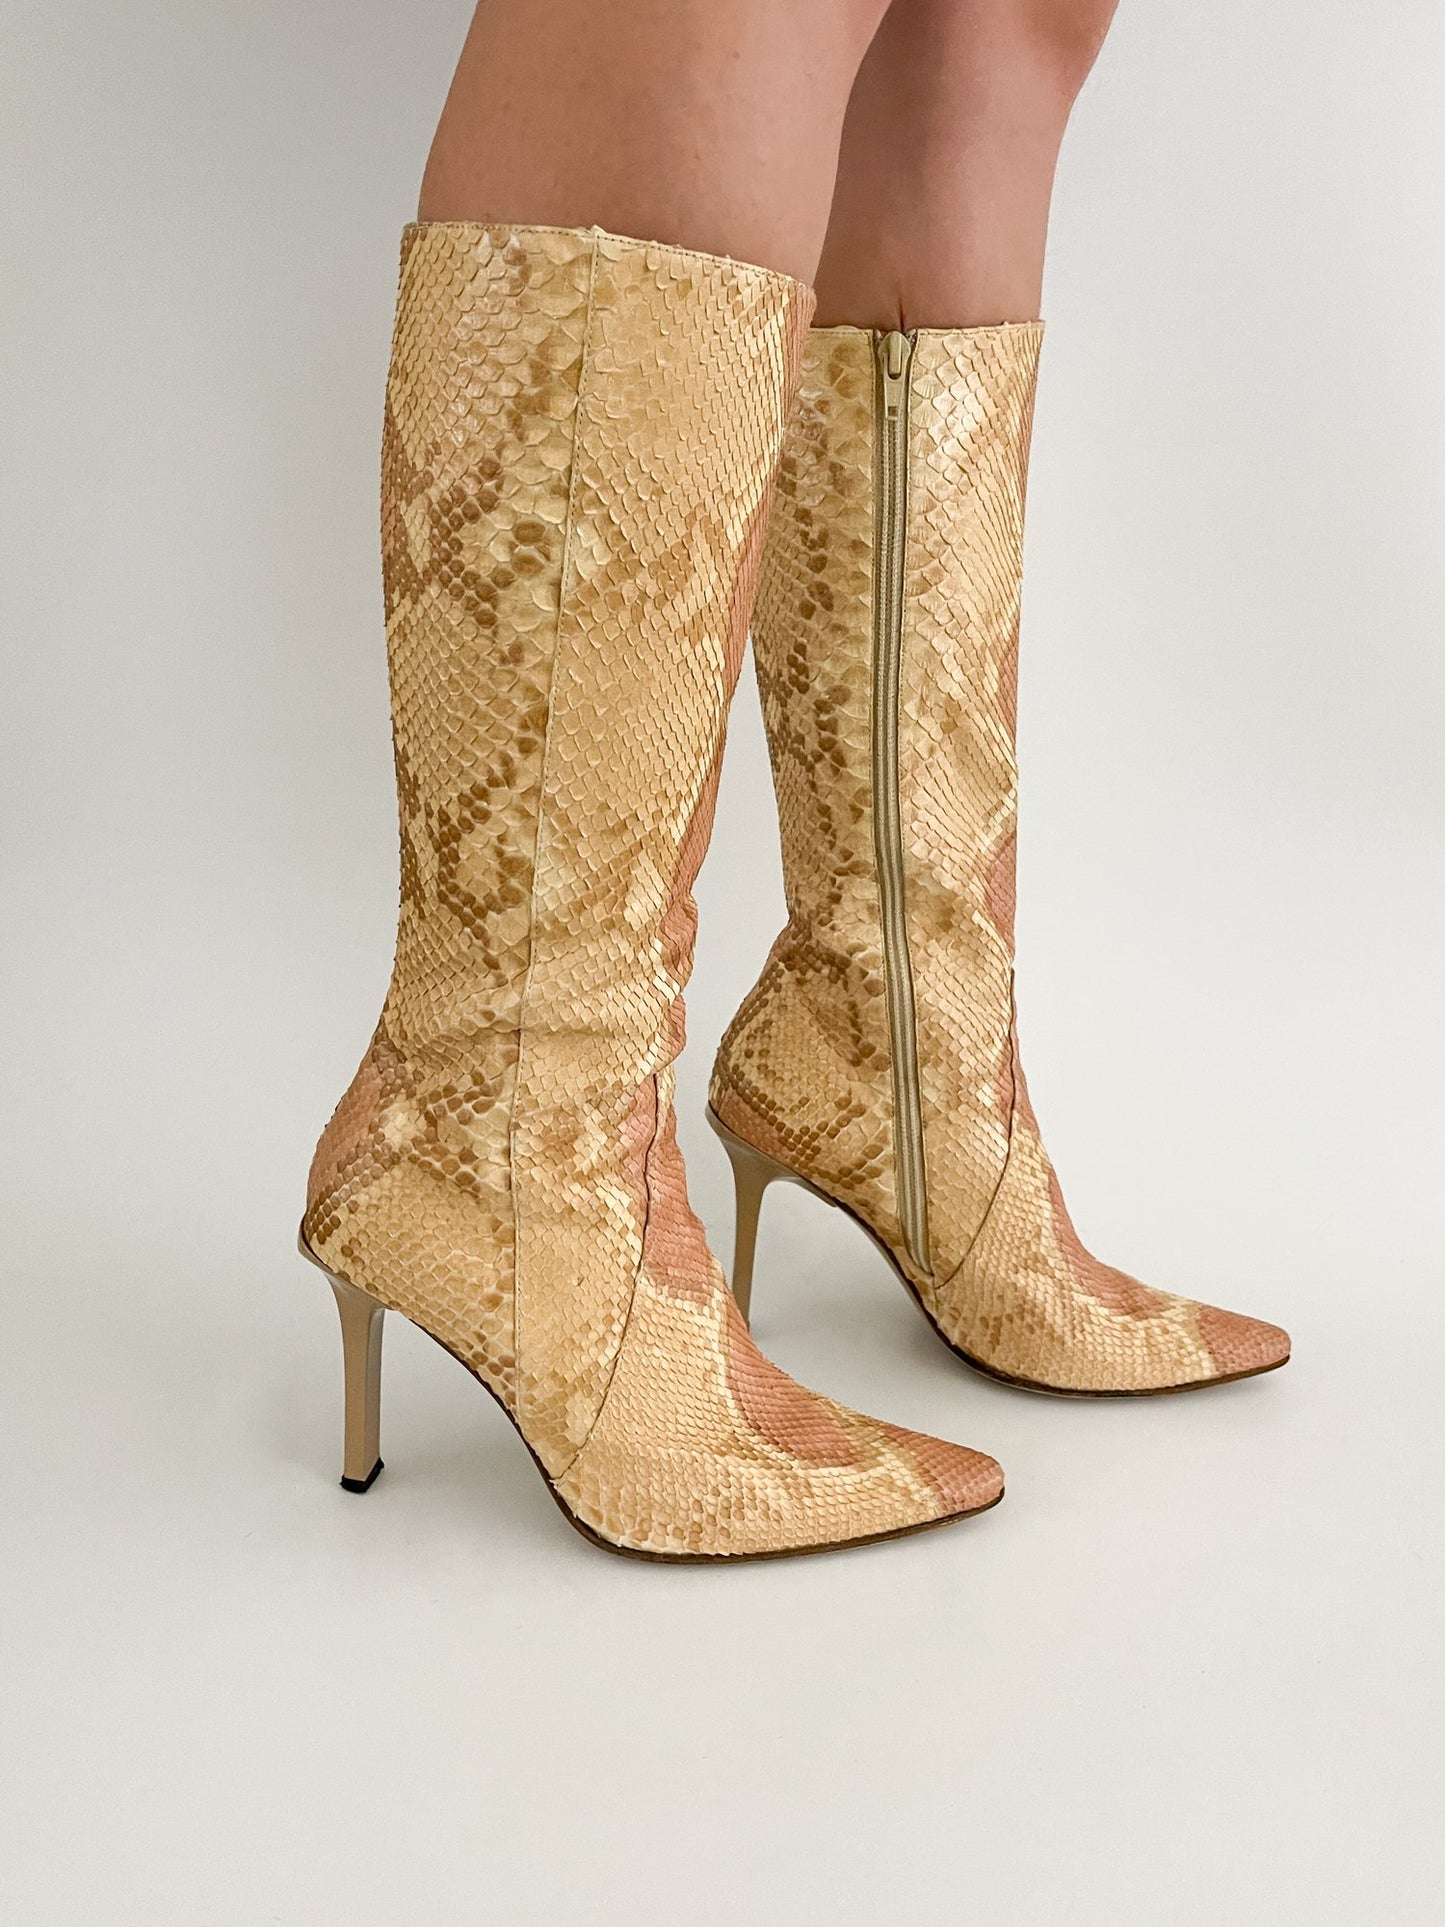 Vintage Casadei snake skin knee high boots as seen on Sex and the city